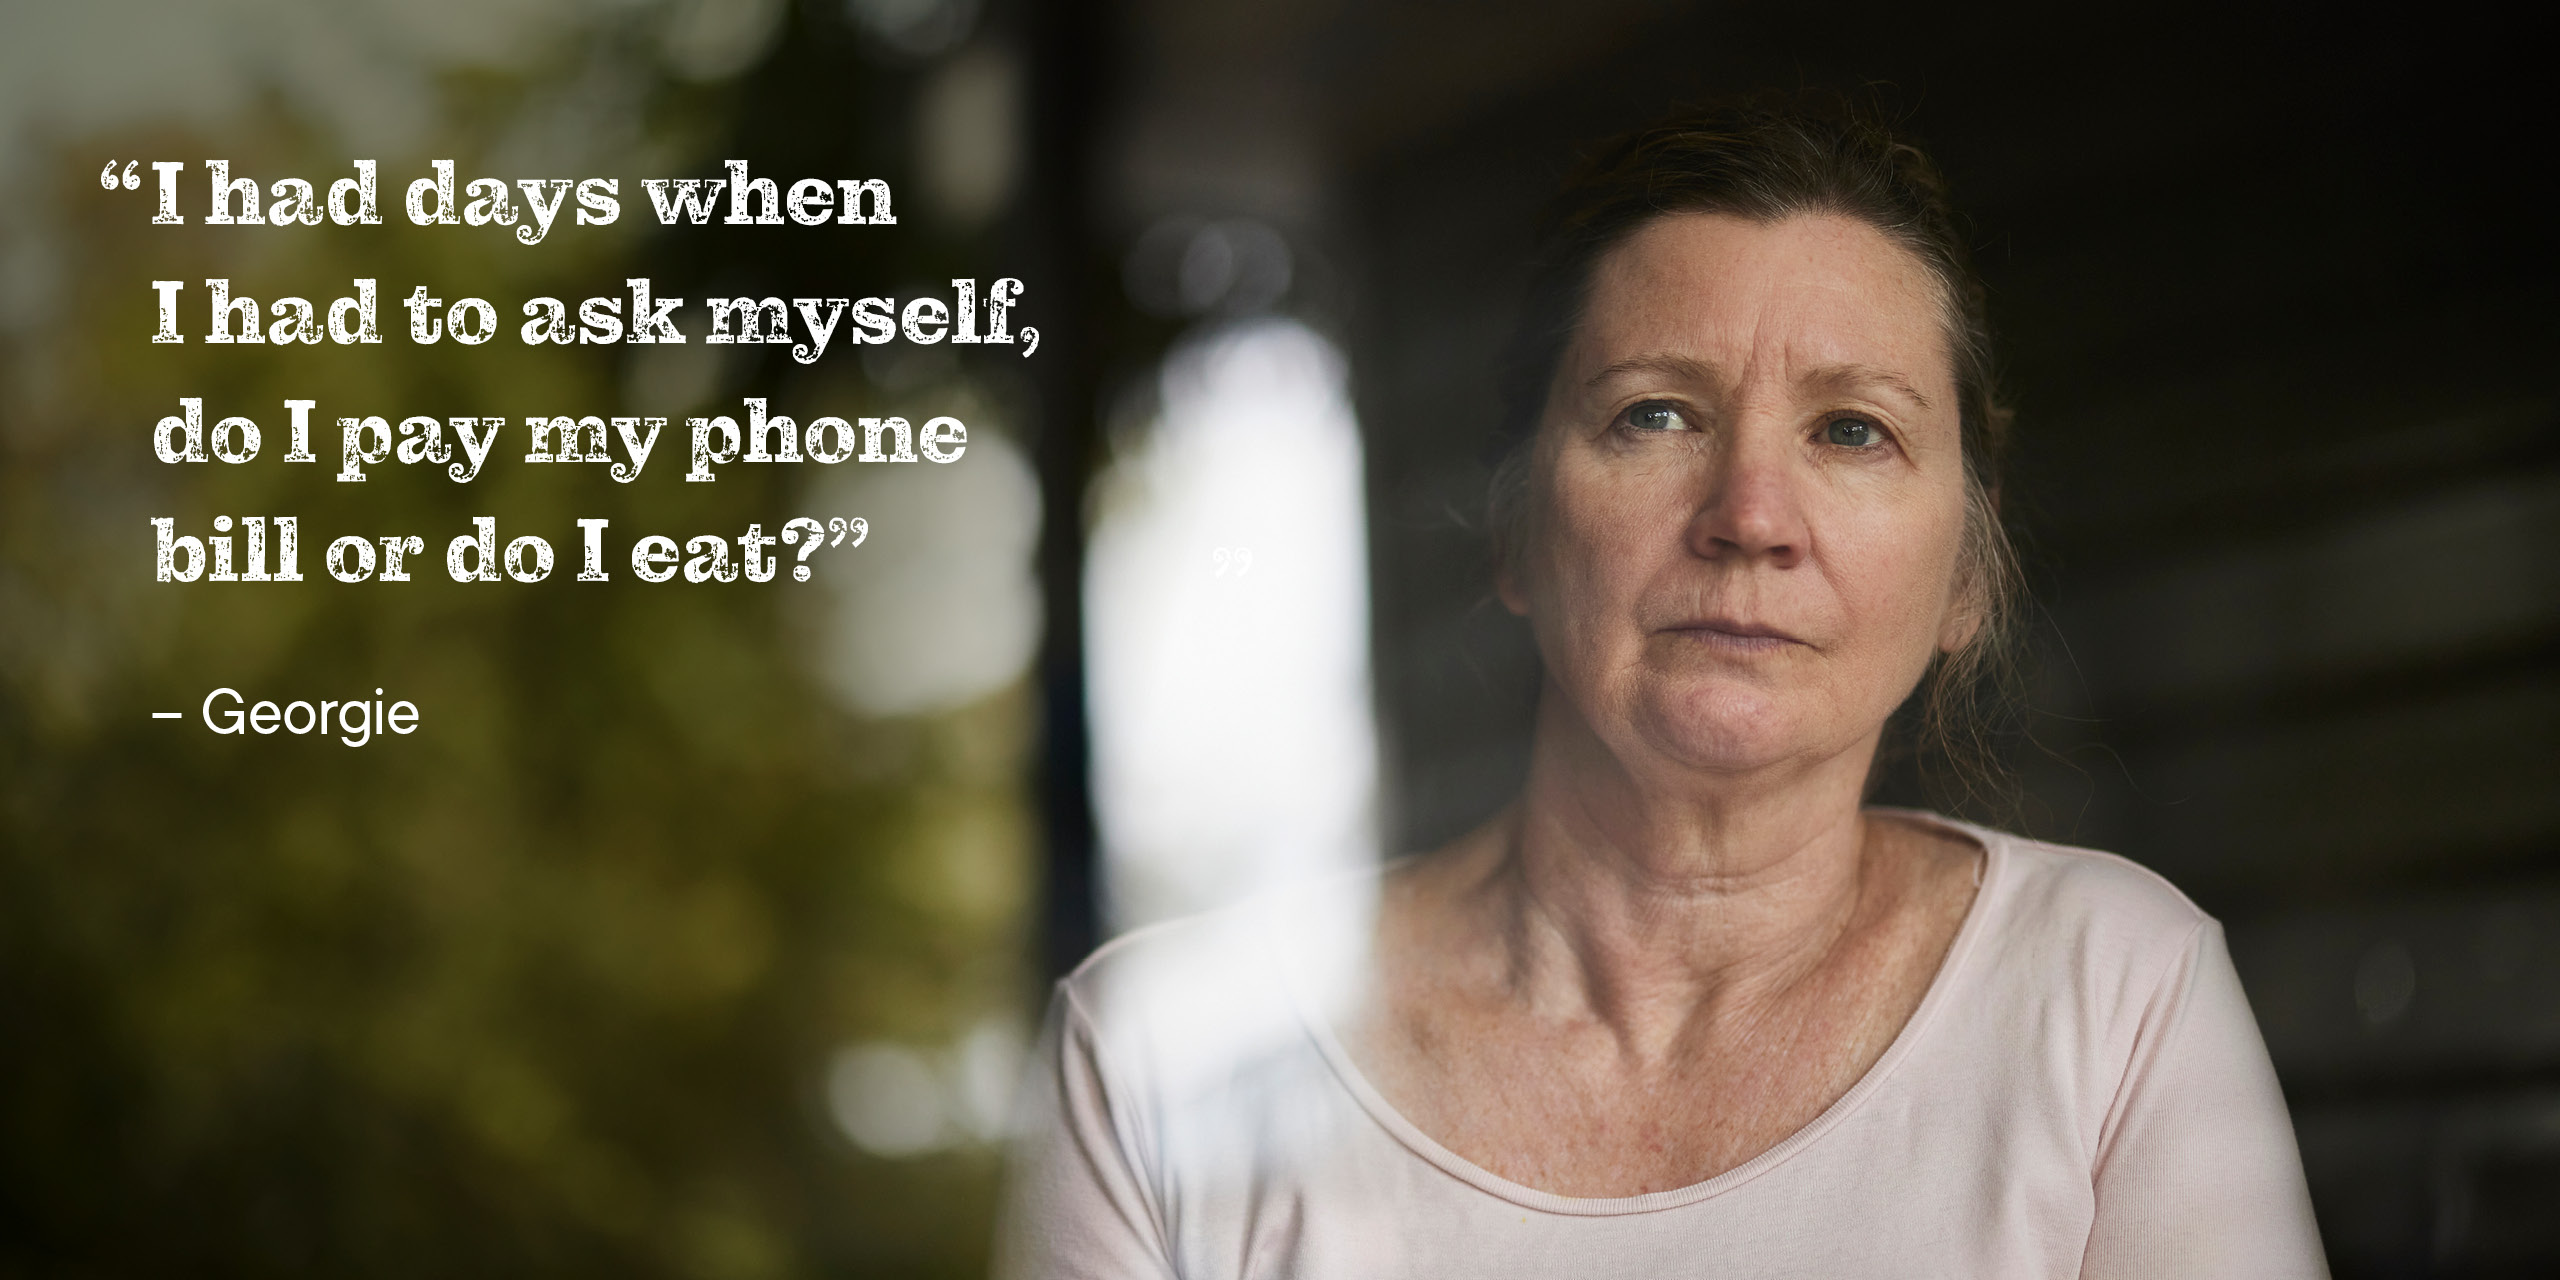 Image of Georgie. Quote: “I had days when I had to ask myself, do I pay my phone bill or do I eat?” - Georgie